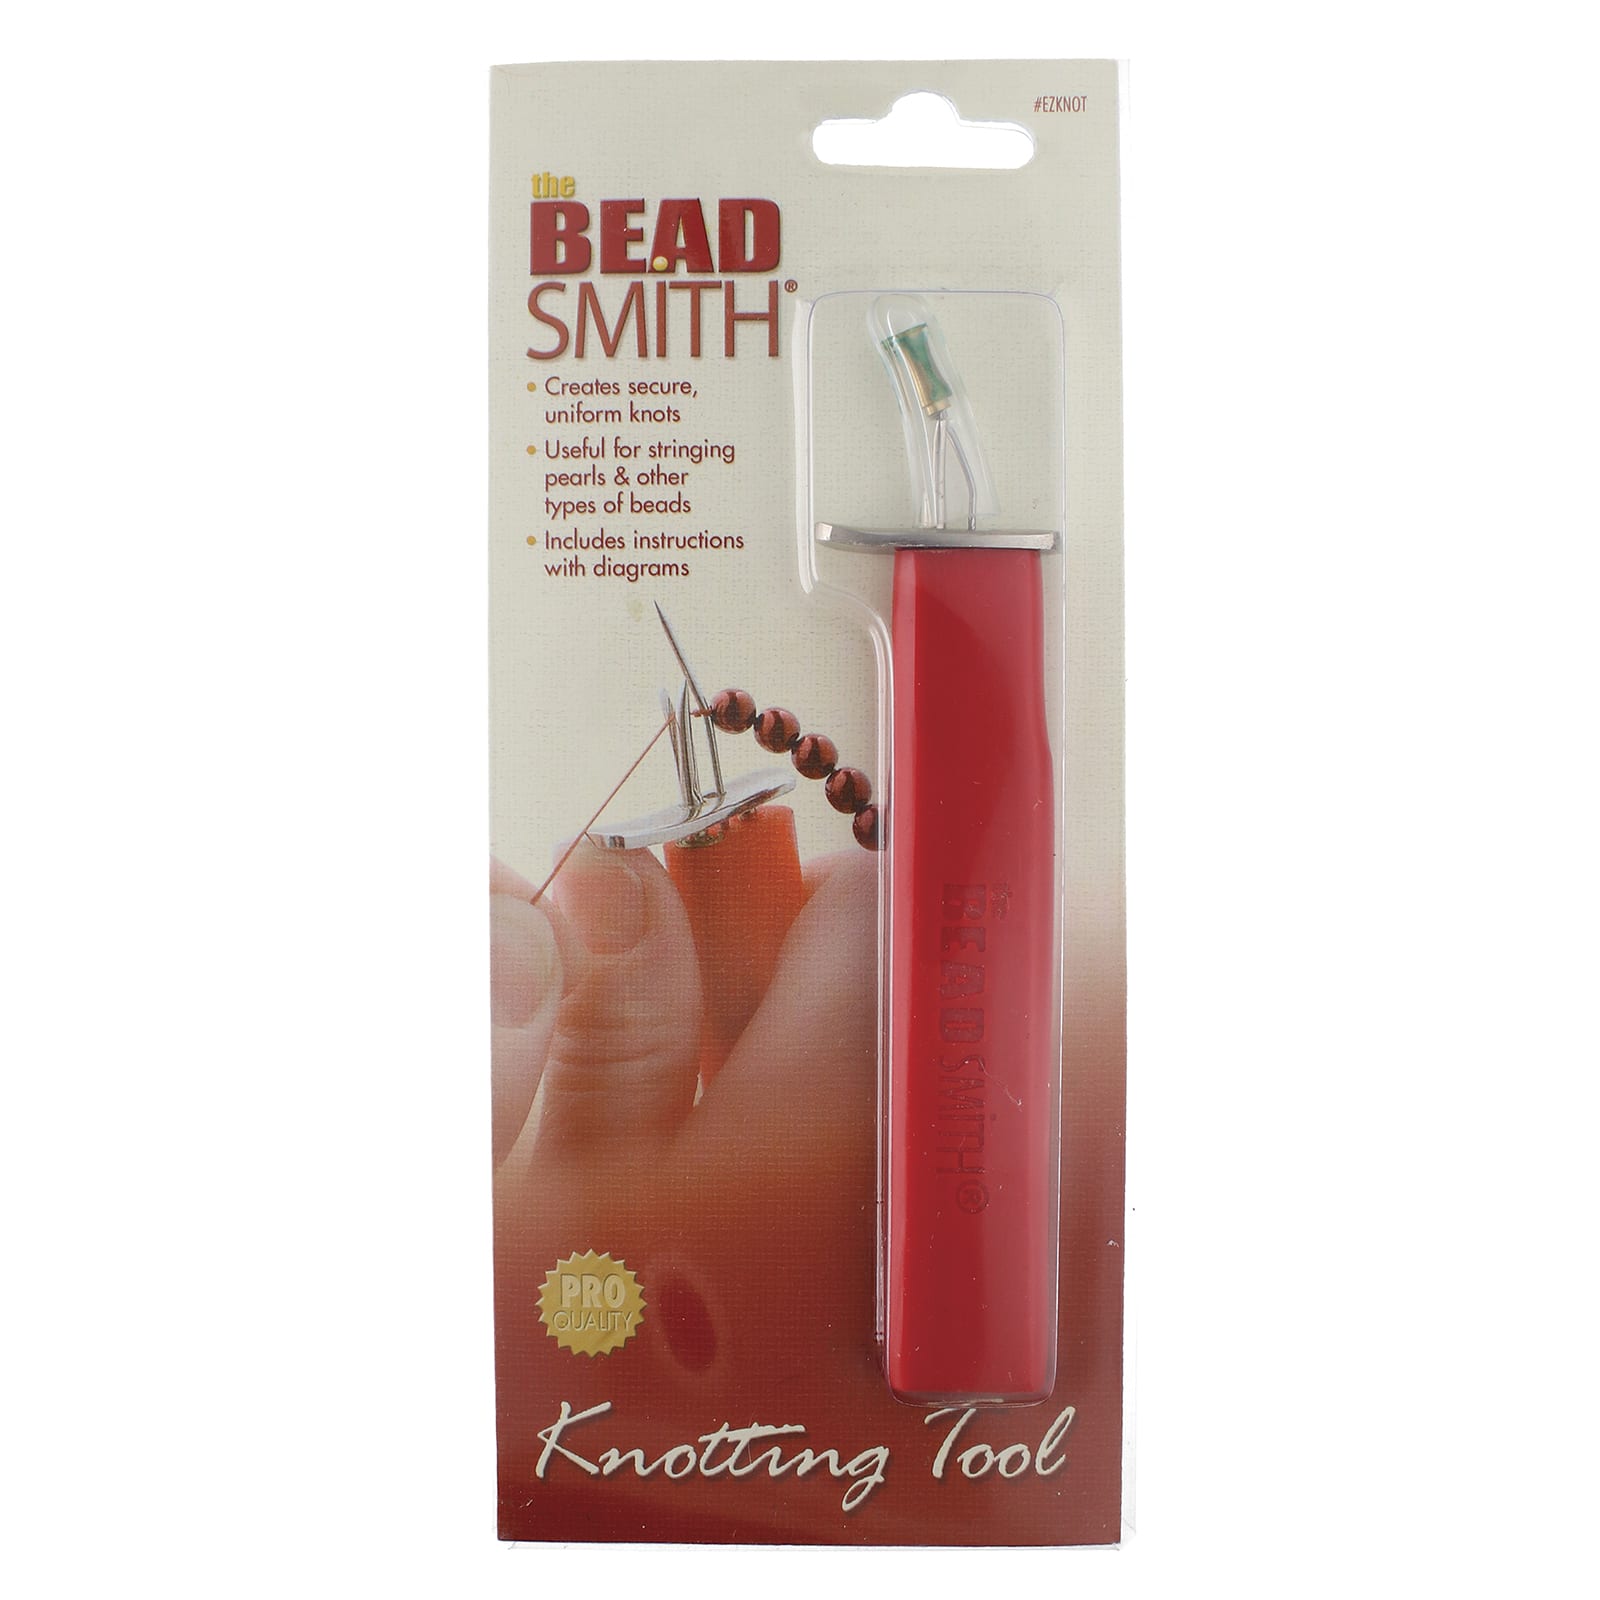 Pearl Knotting Tool Bead Knotter Crafting Beading Knot Create